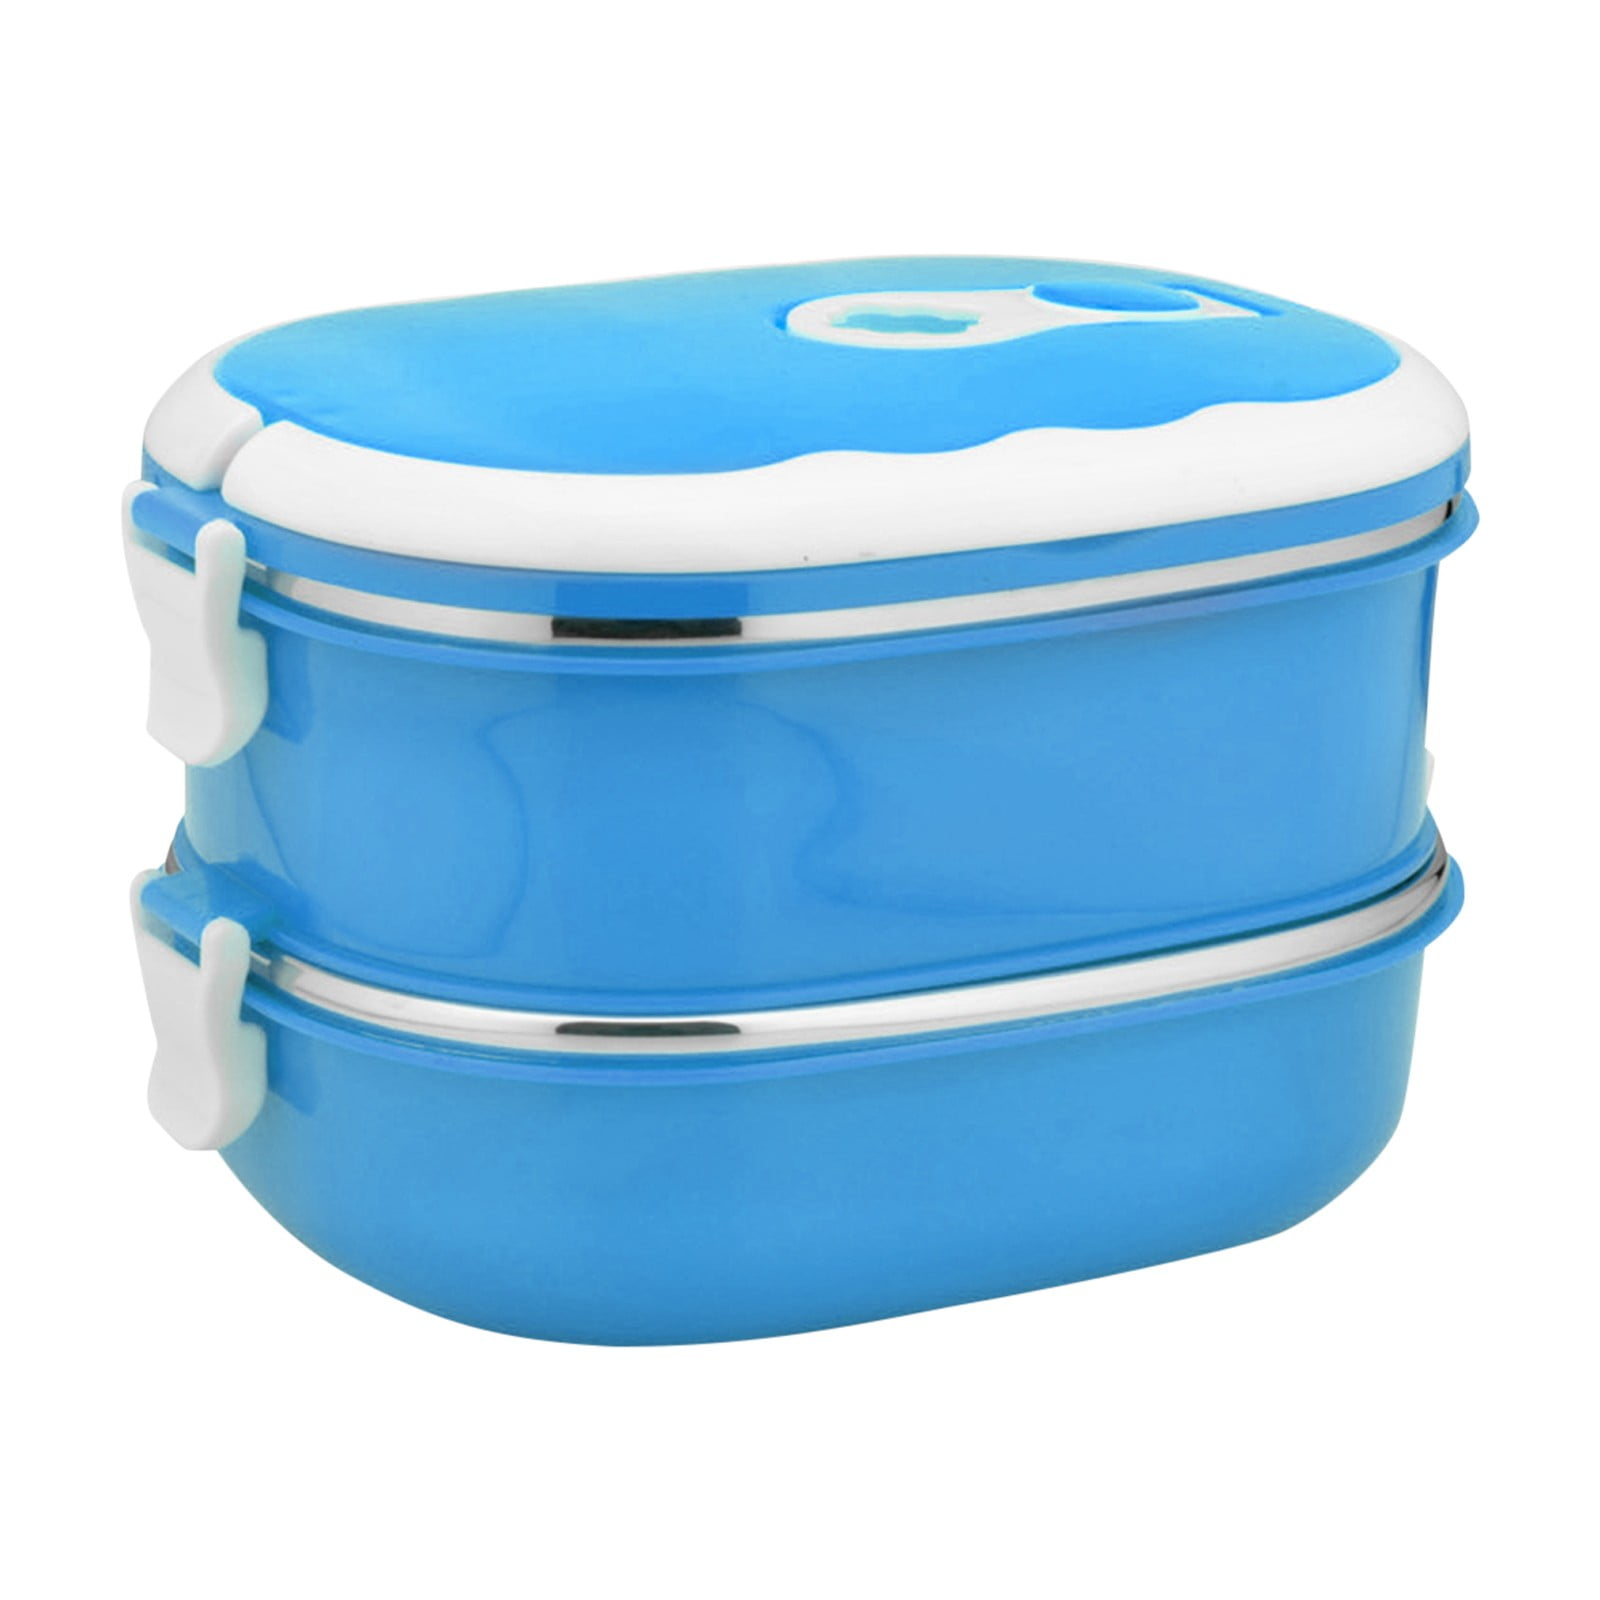 Keusn Portable Insulated Lunch Container Set Stackable Stainless Steel Food Container with Thermal Bag Upgrade Food Storage Container Boxes, Adult